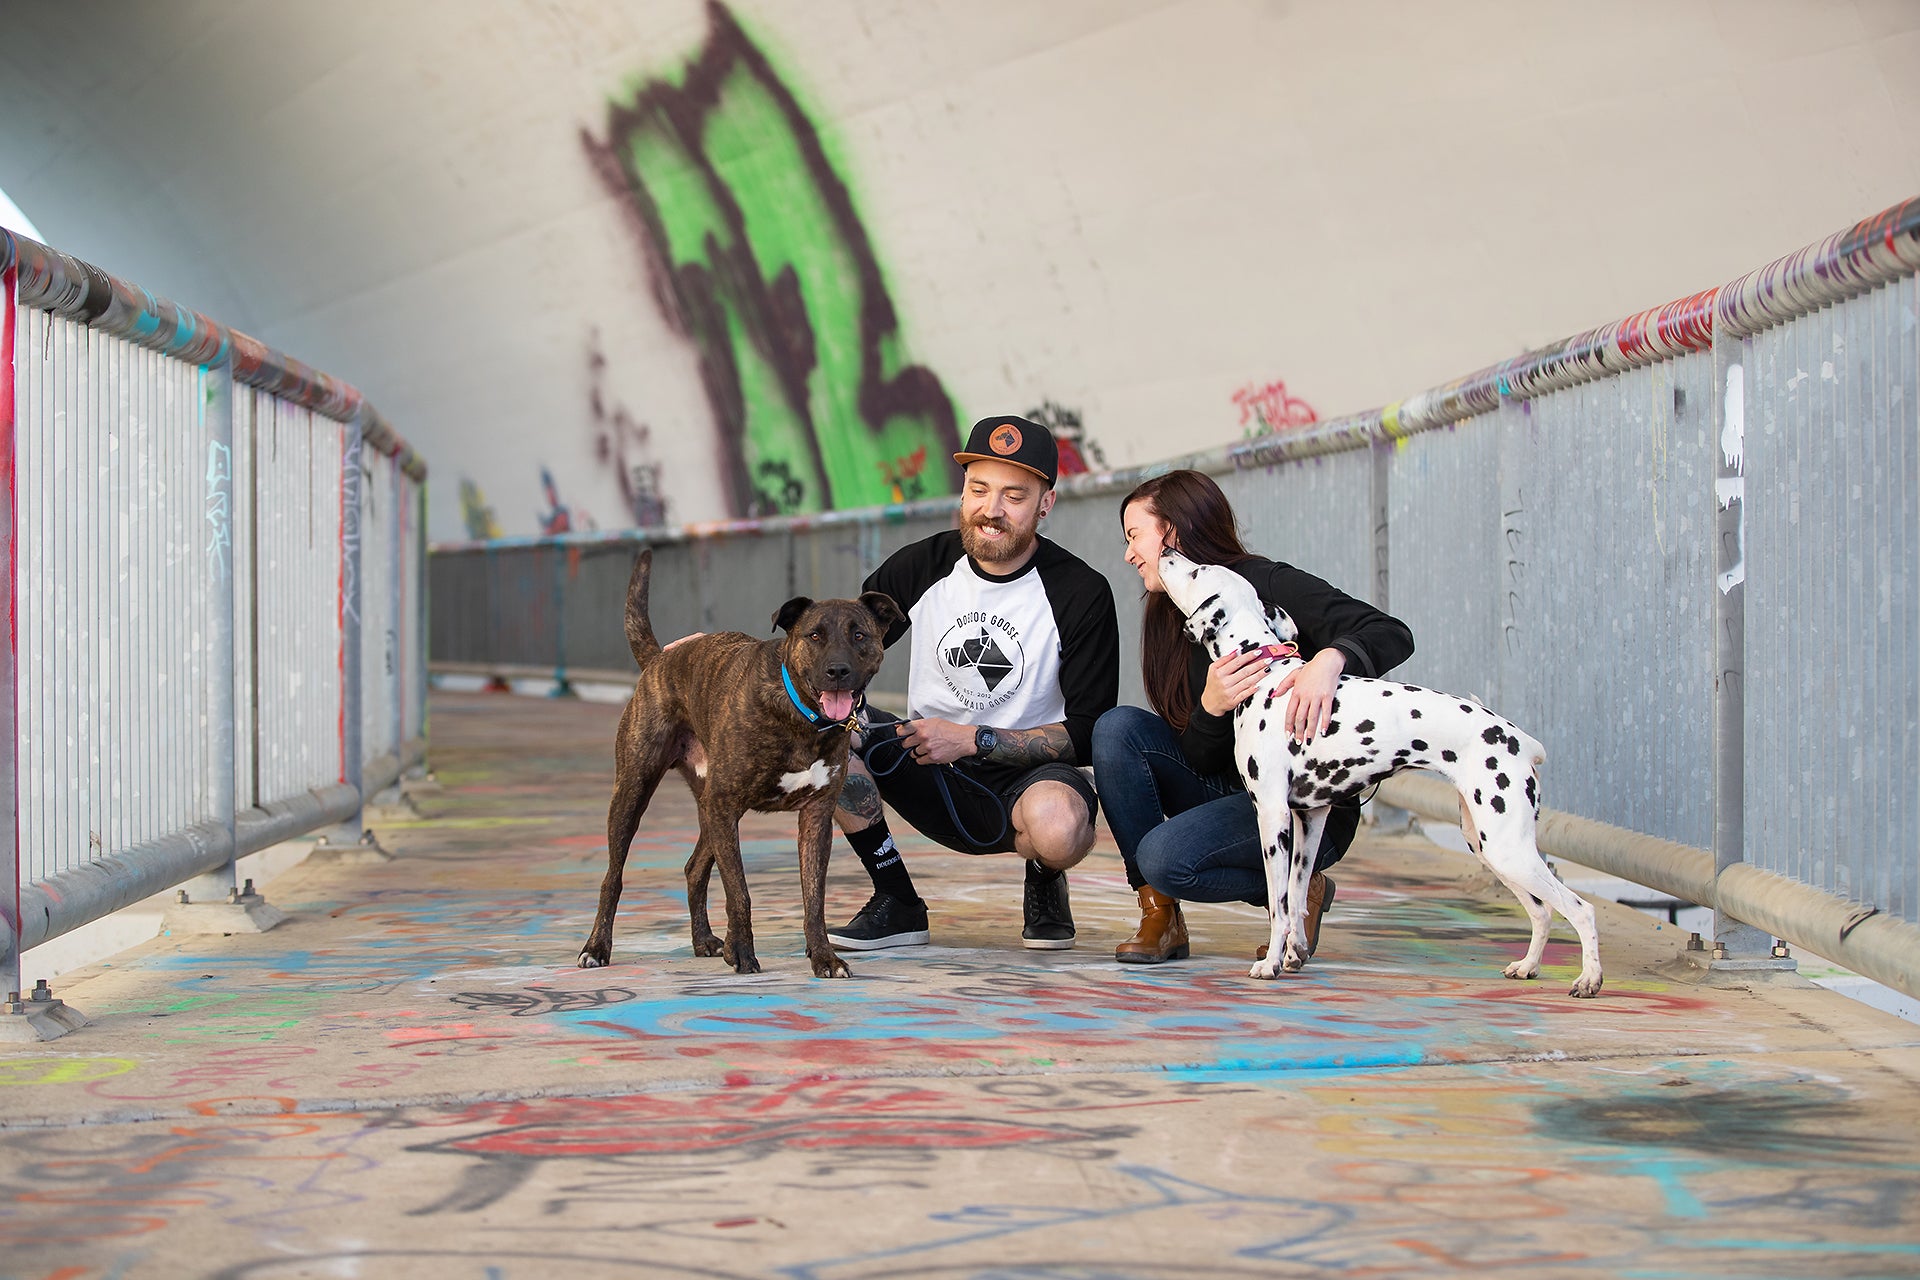 Man and woman crouching with two dogs - brindle mixed breed and Dalmatian.